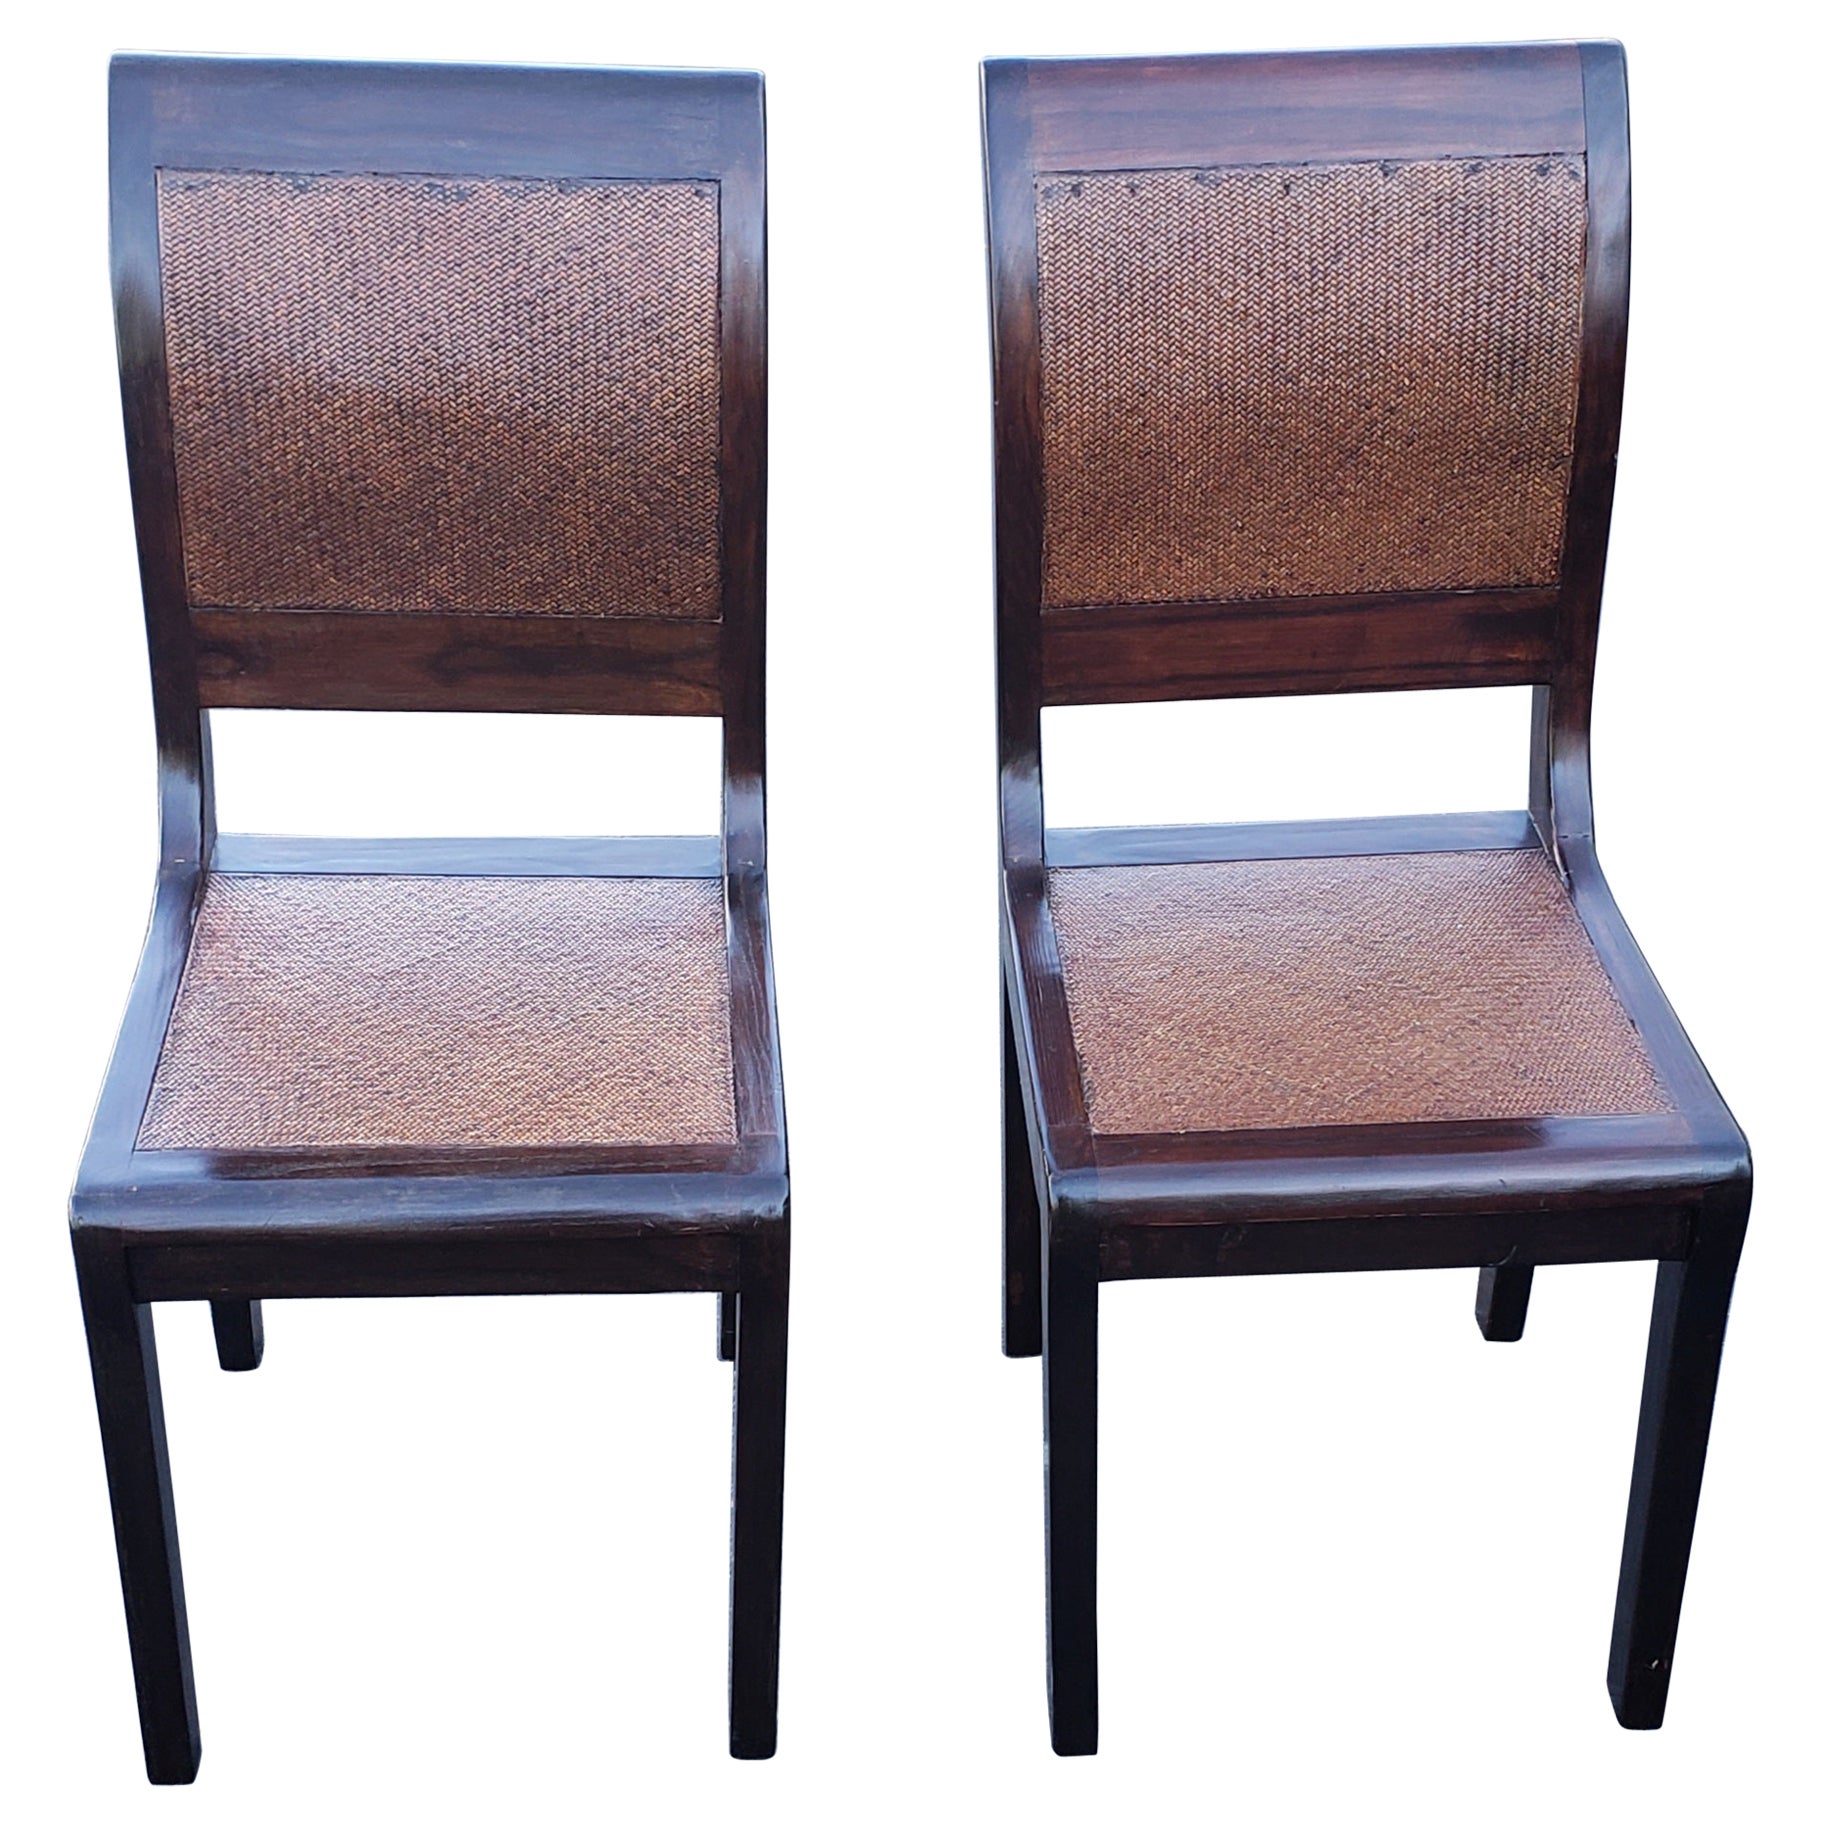 Pair of 1950s Rosewood and Braided Wicker over Hardwood Seat and Back Chairs